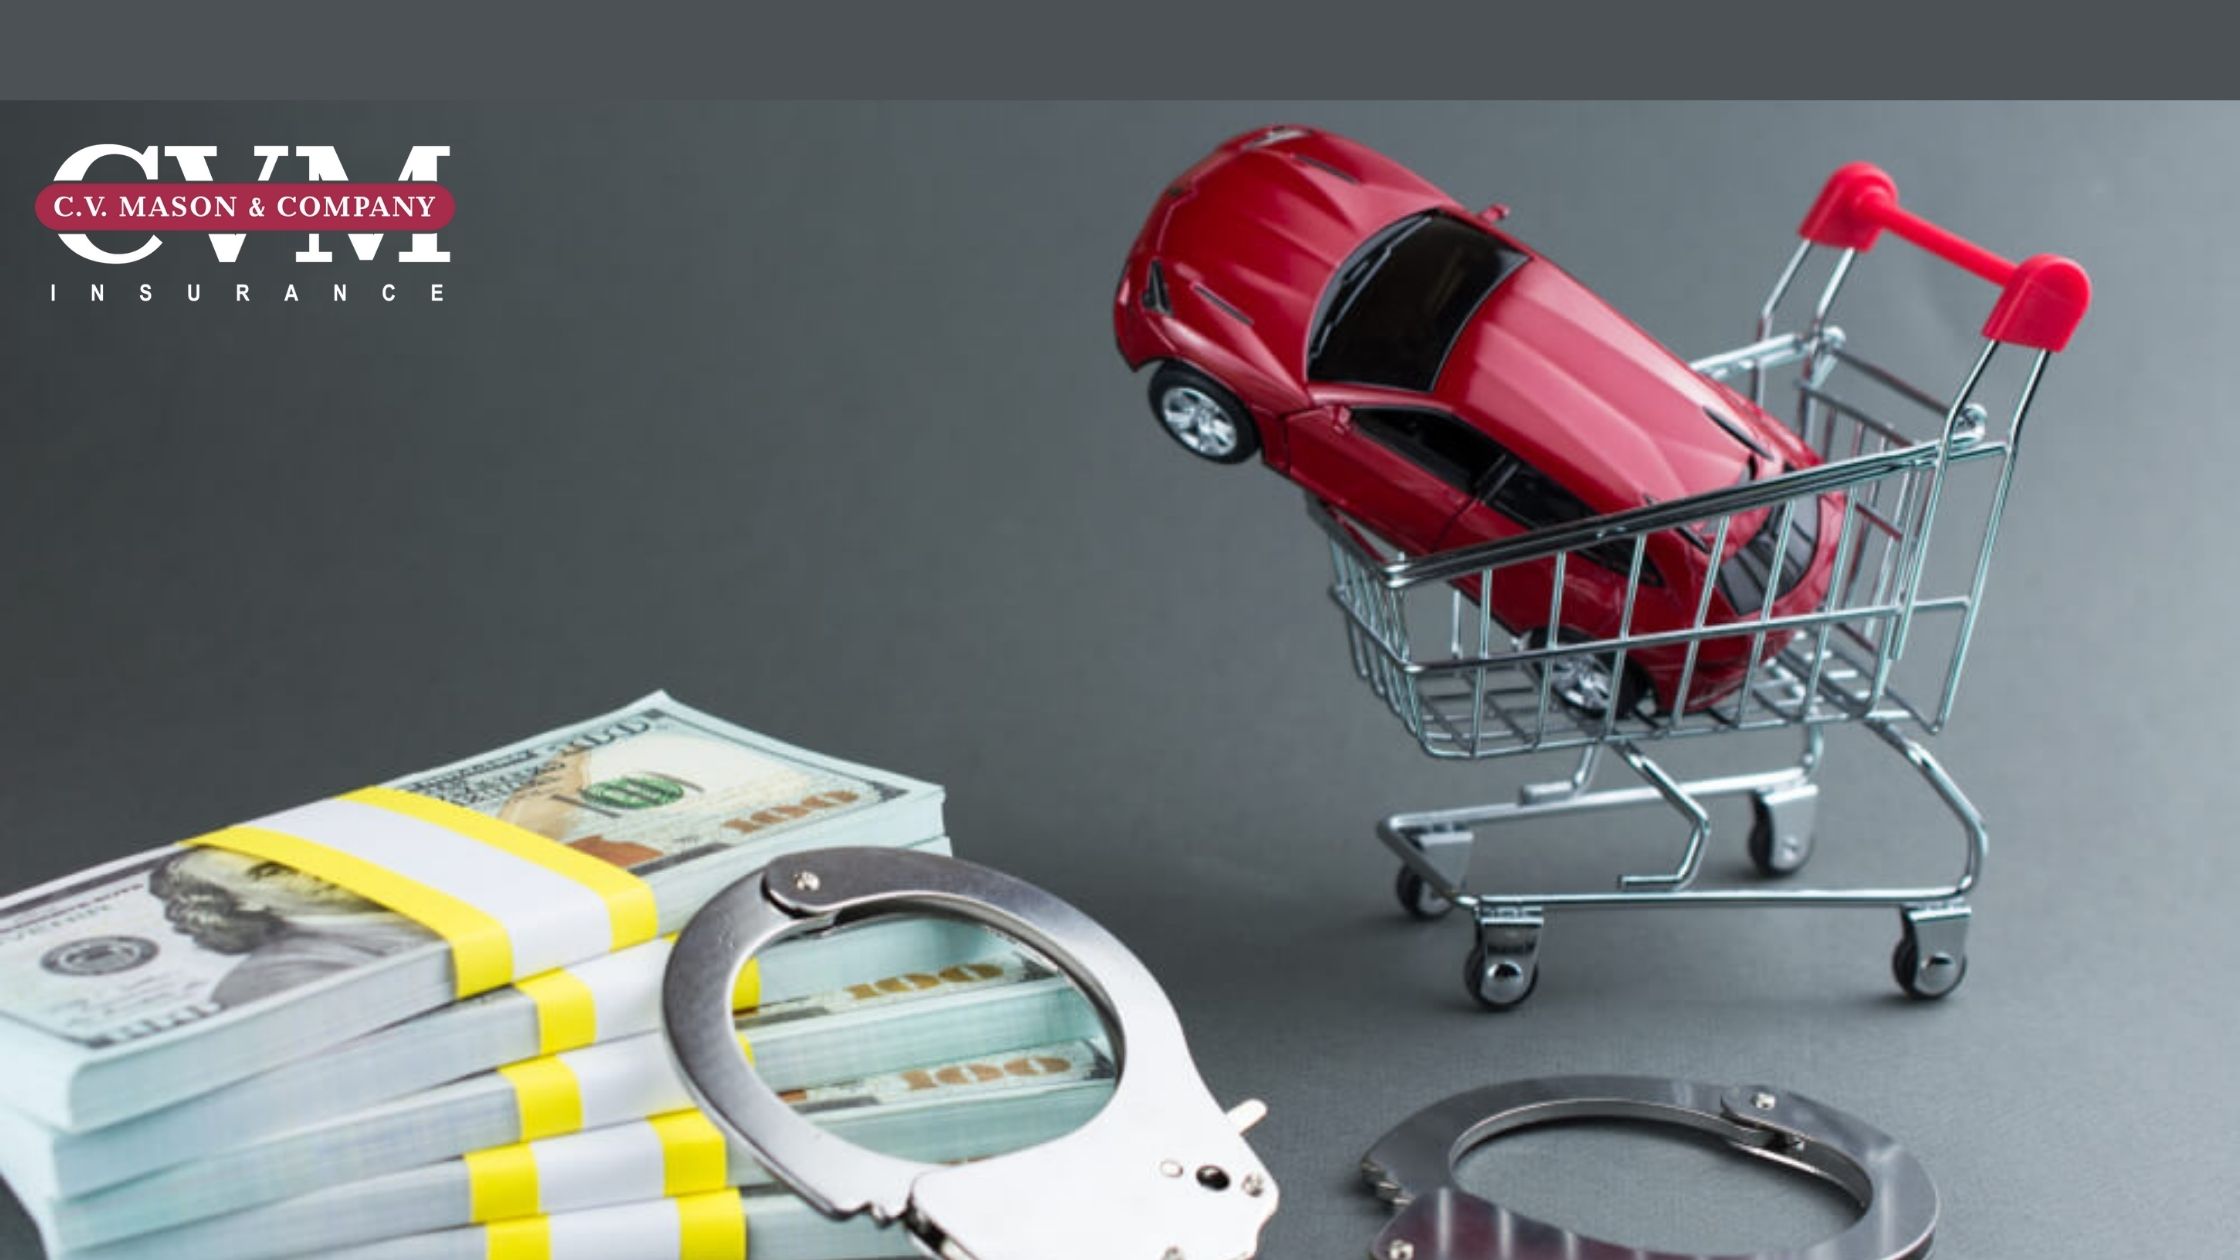 Auto Insurance Scams in 2022 to Watch Out For